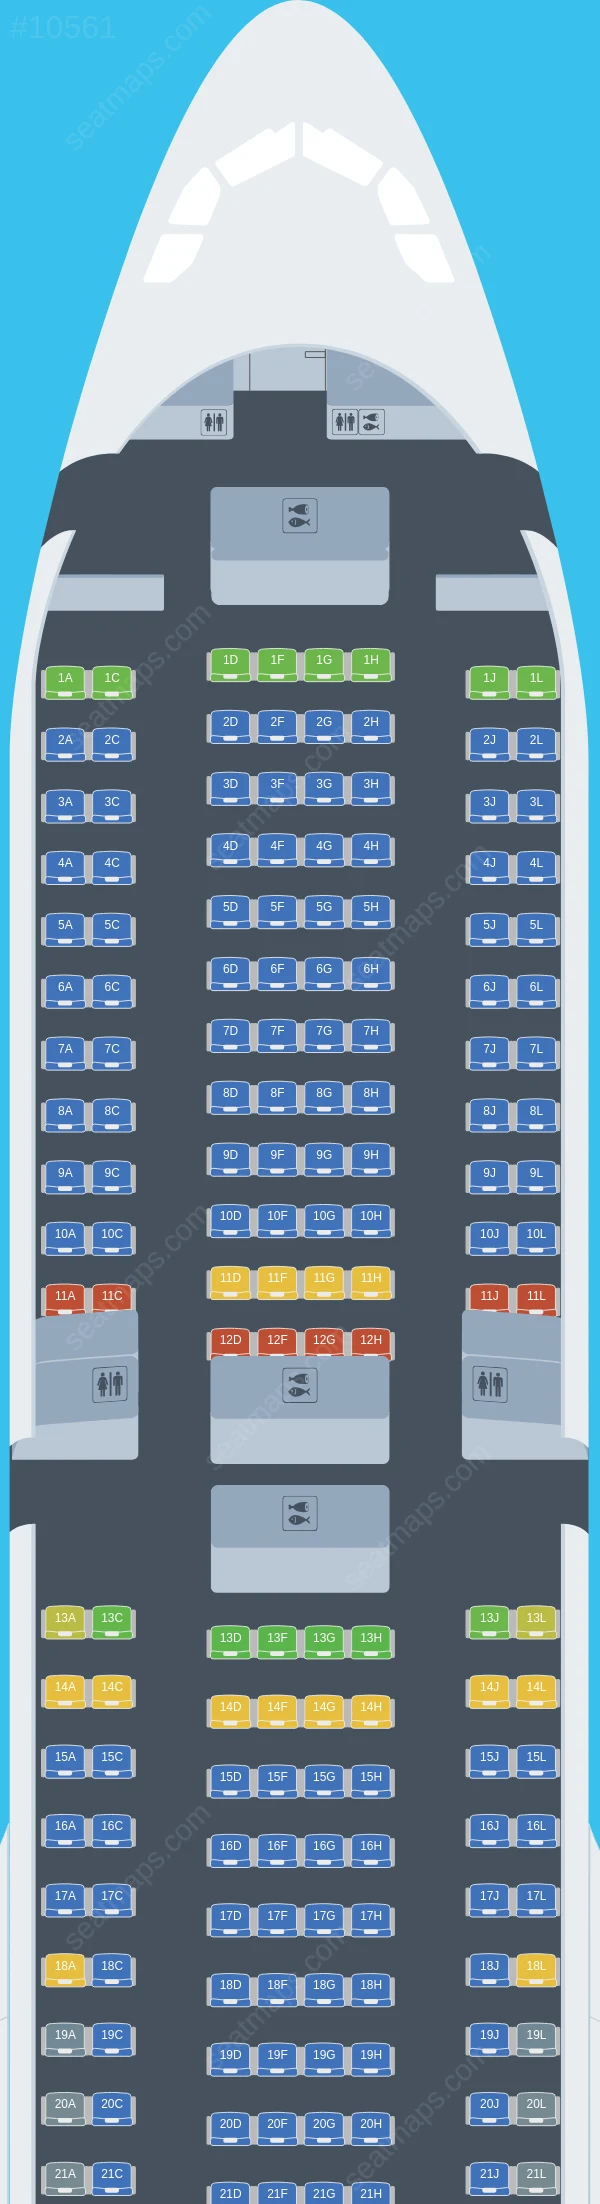 World 2 Fly Airbus A330-300 seatmap preview